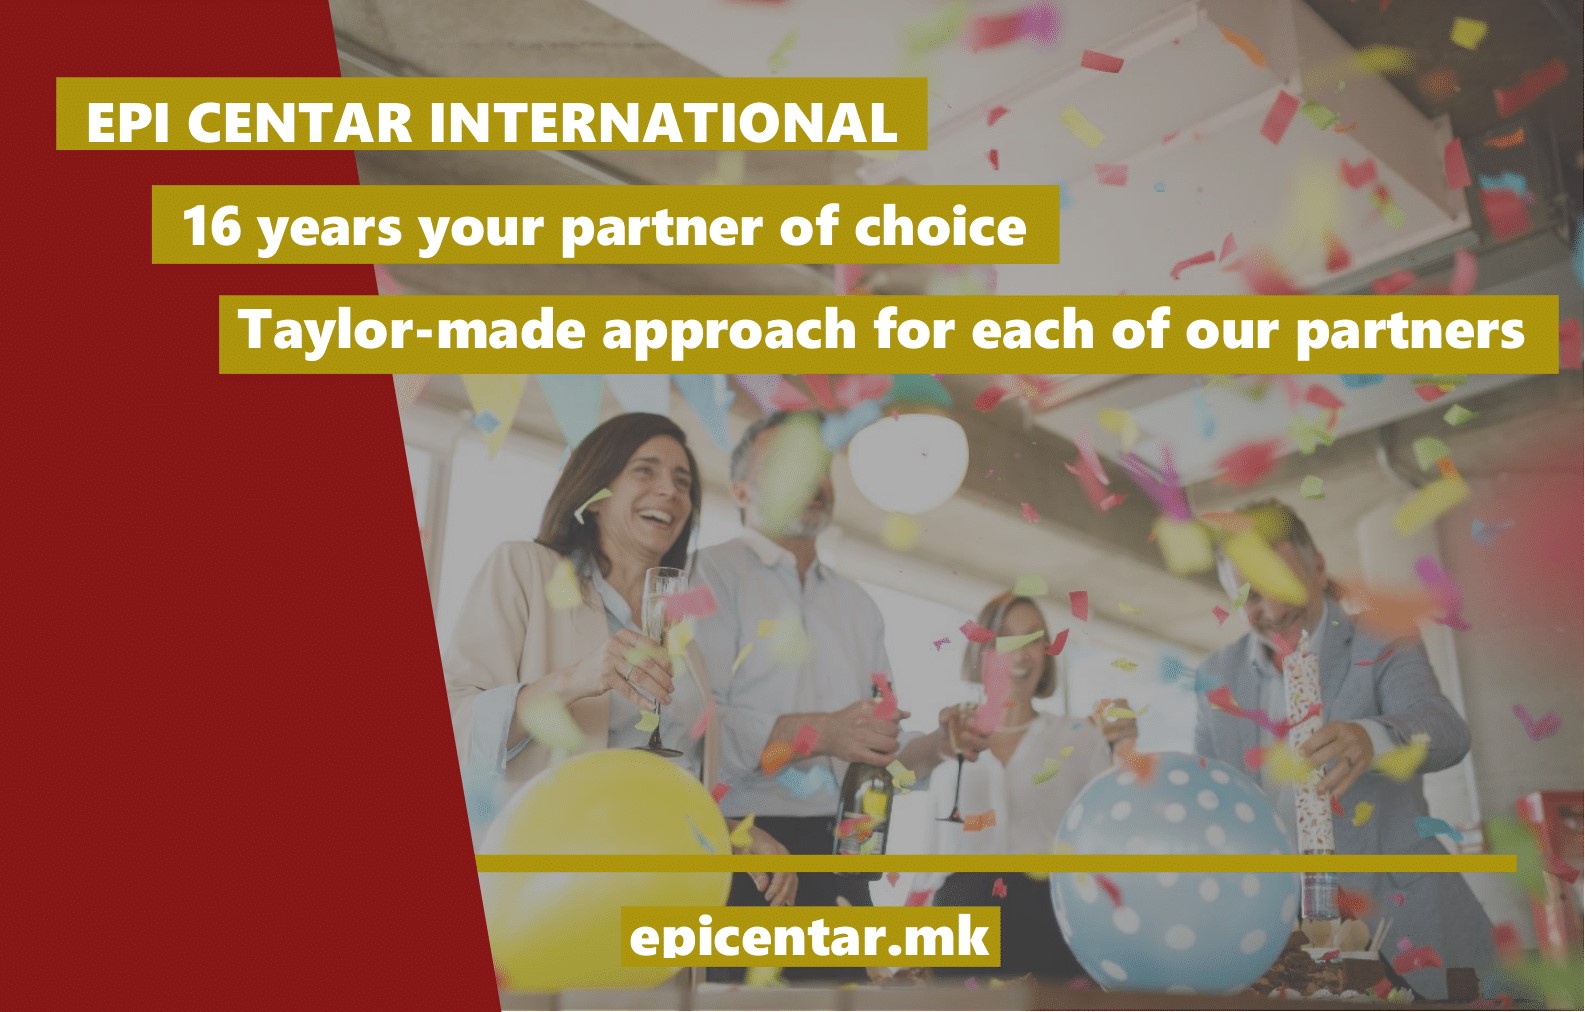 We are extremely proud to announce our 16th anniversary! We consider our clients and partners to be part of the Epicentar family and without your trust and commitment to us this would not have been possible. To many more years of being your partner of choice! 